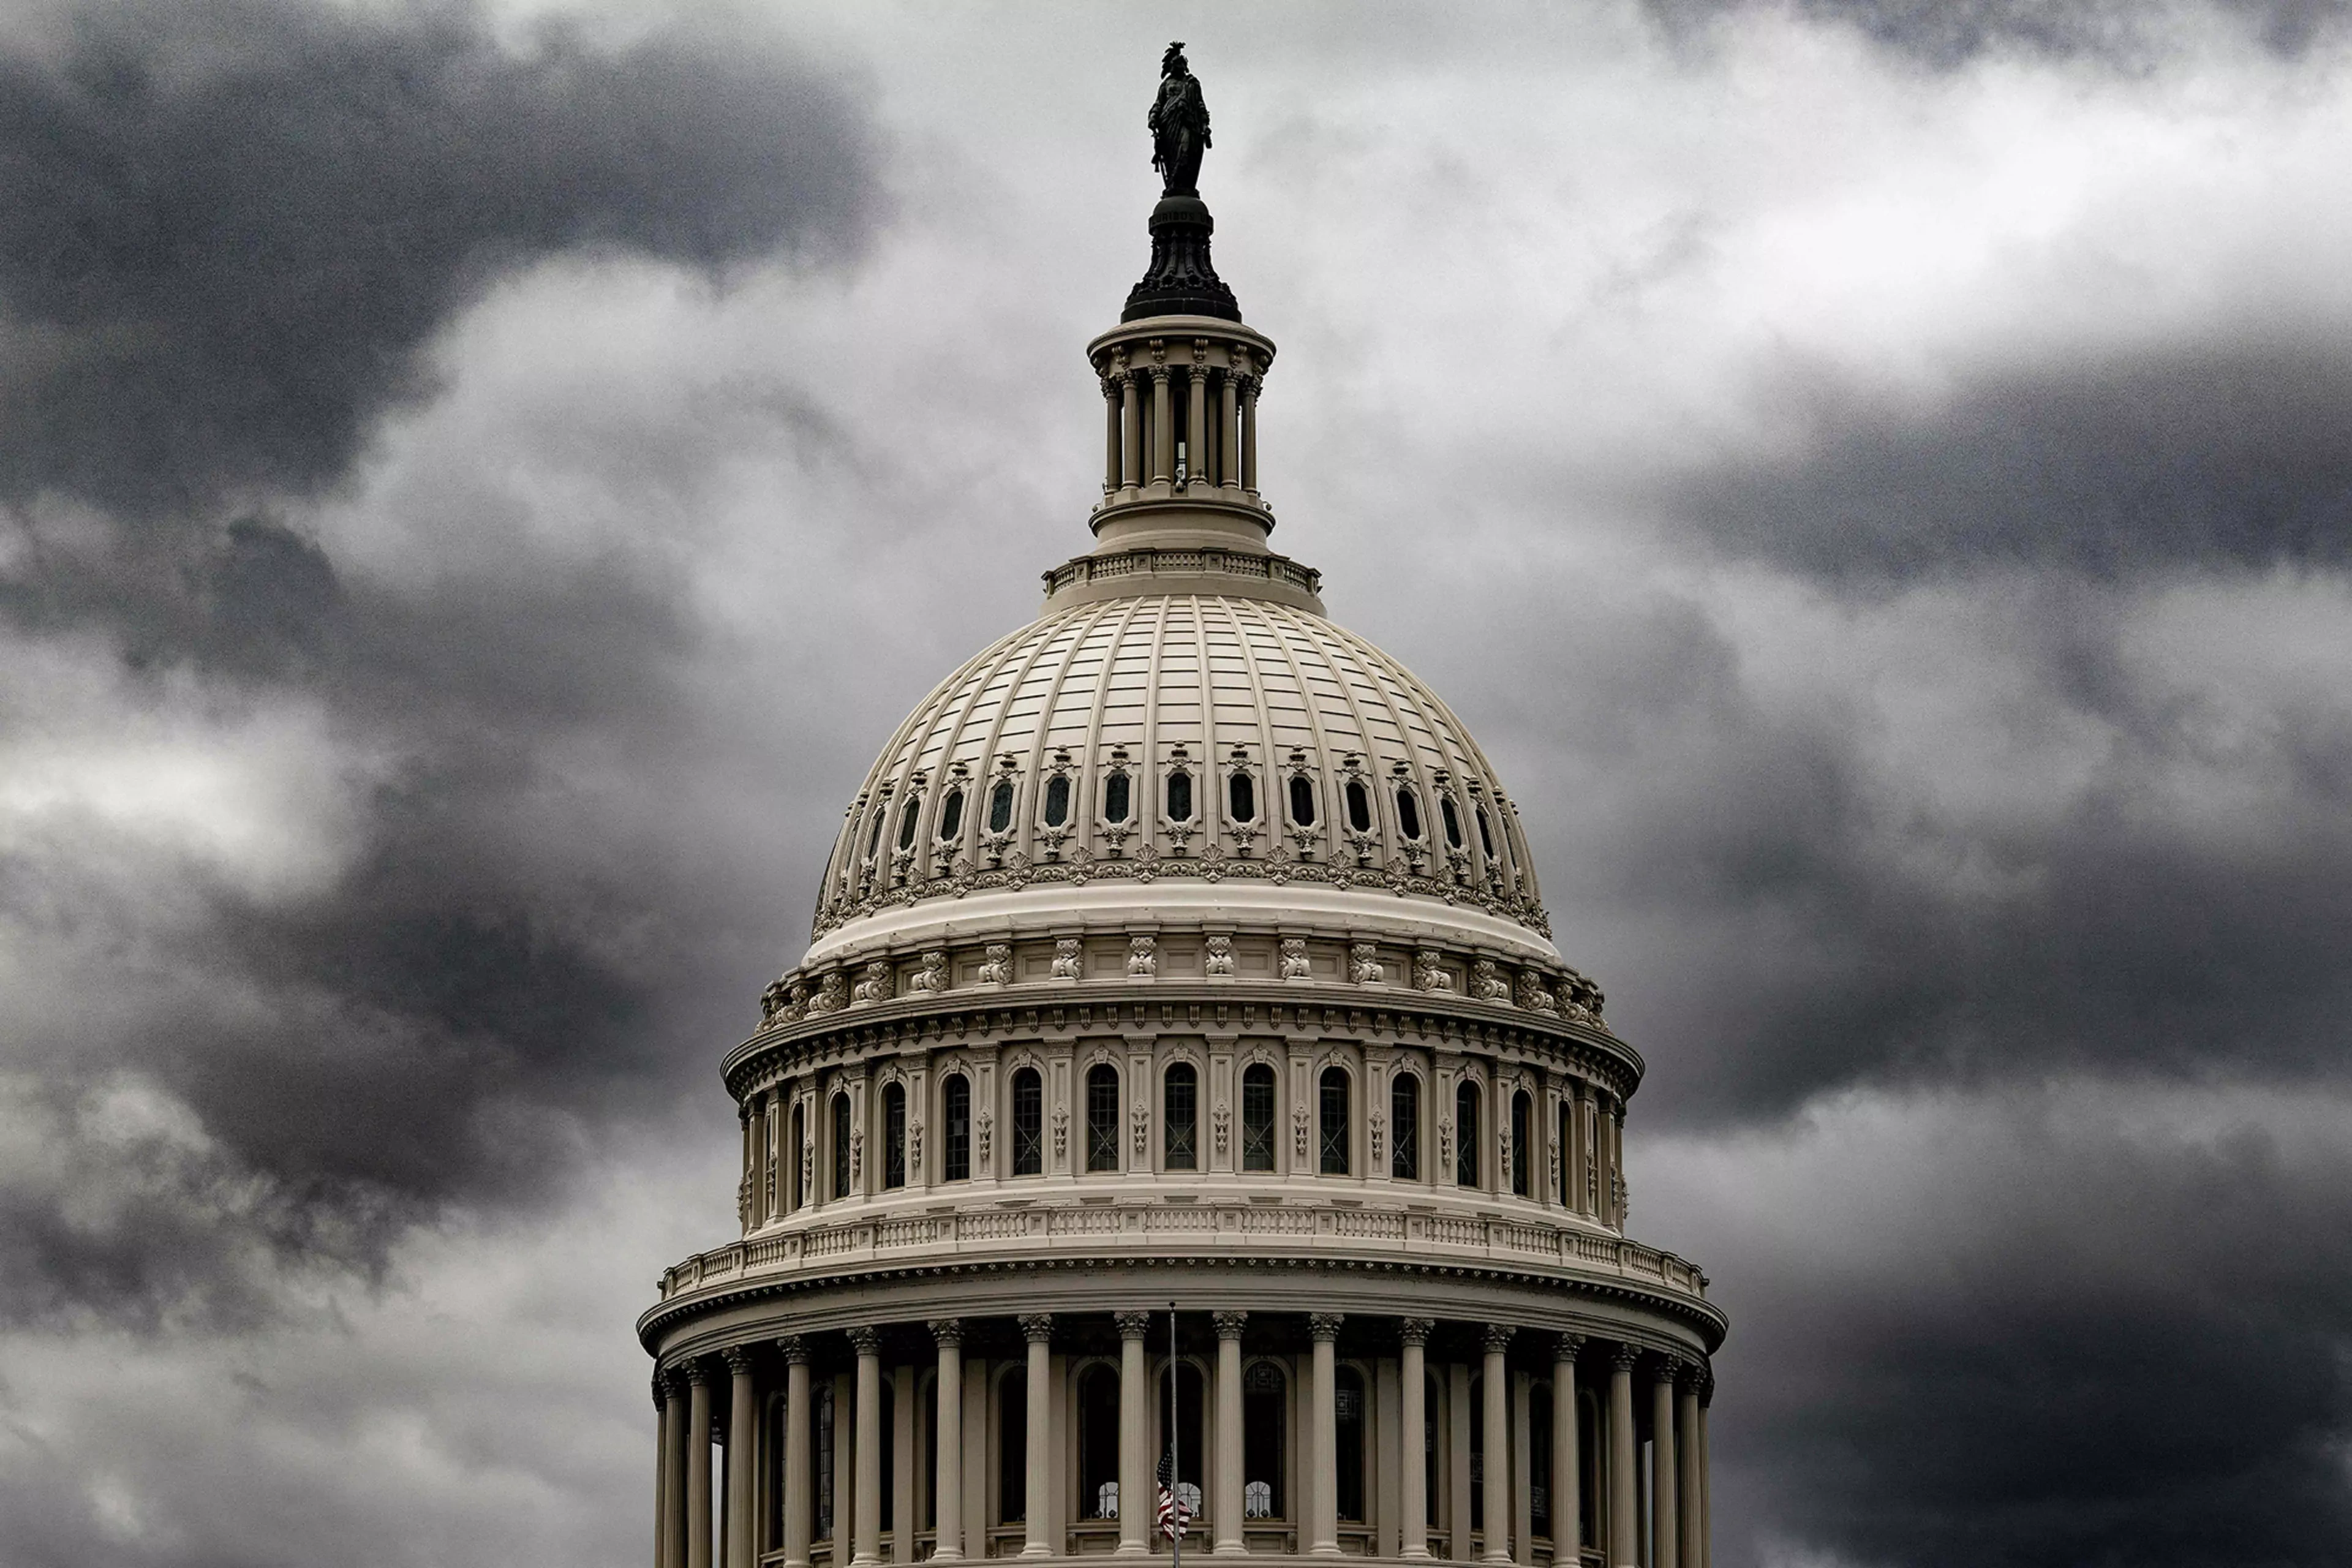 Storm clouds hover above the U.S. Capitol.